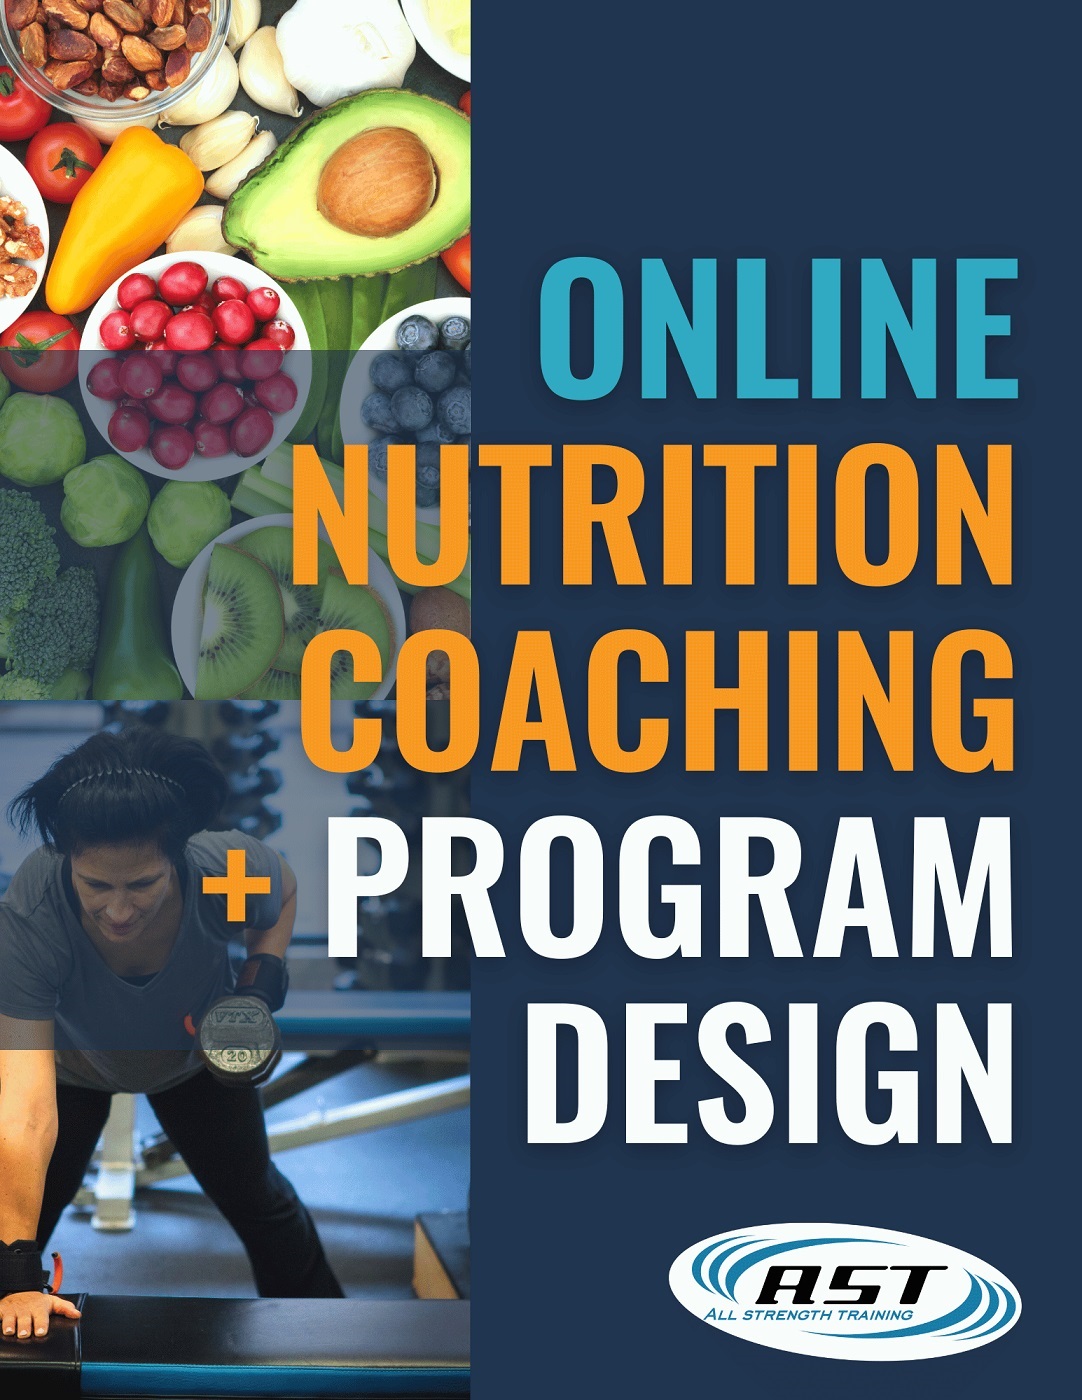 Online nutrition coaching